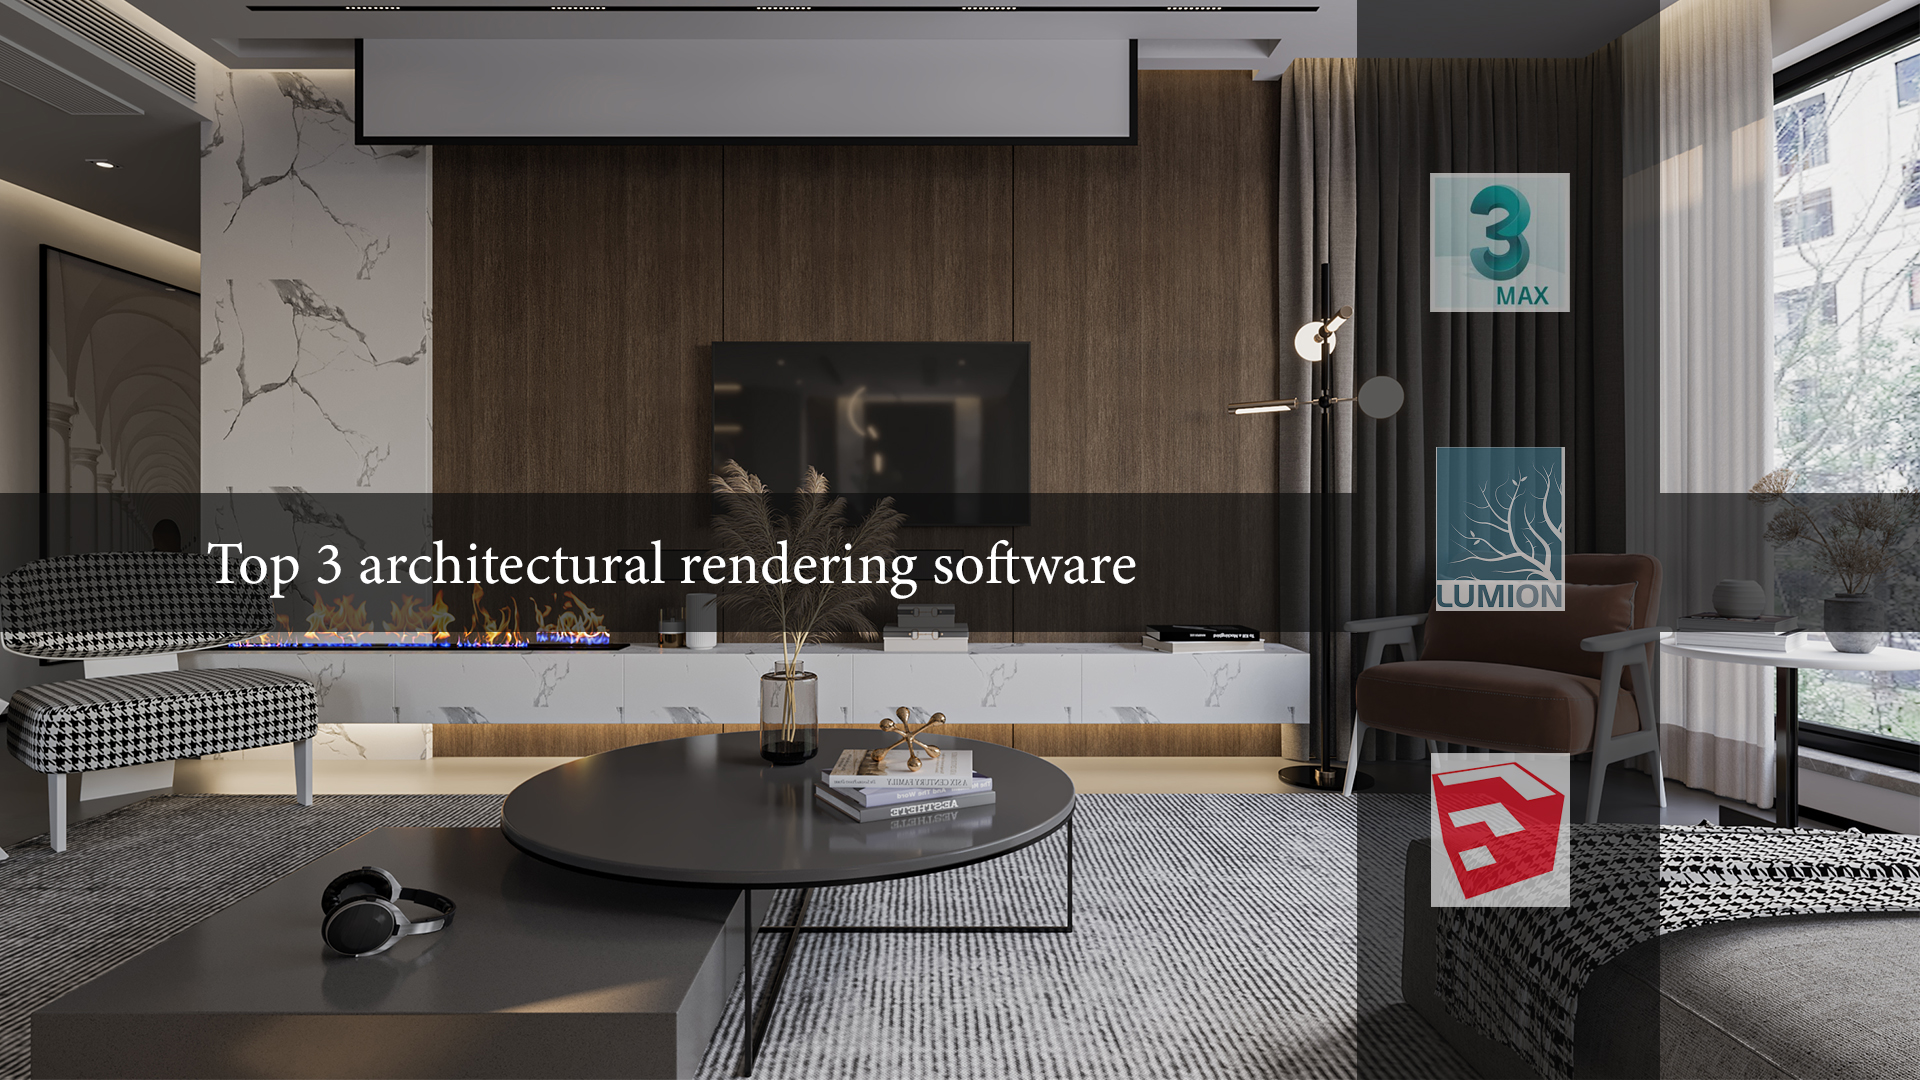 Top 3 architectural rendering software